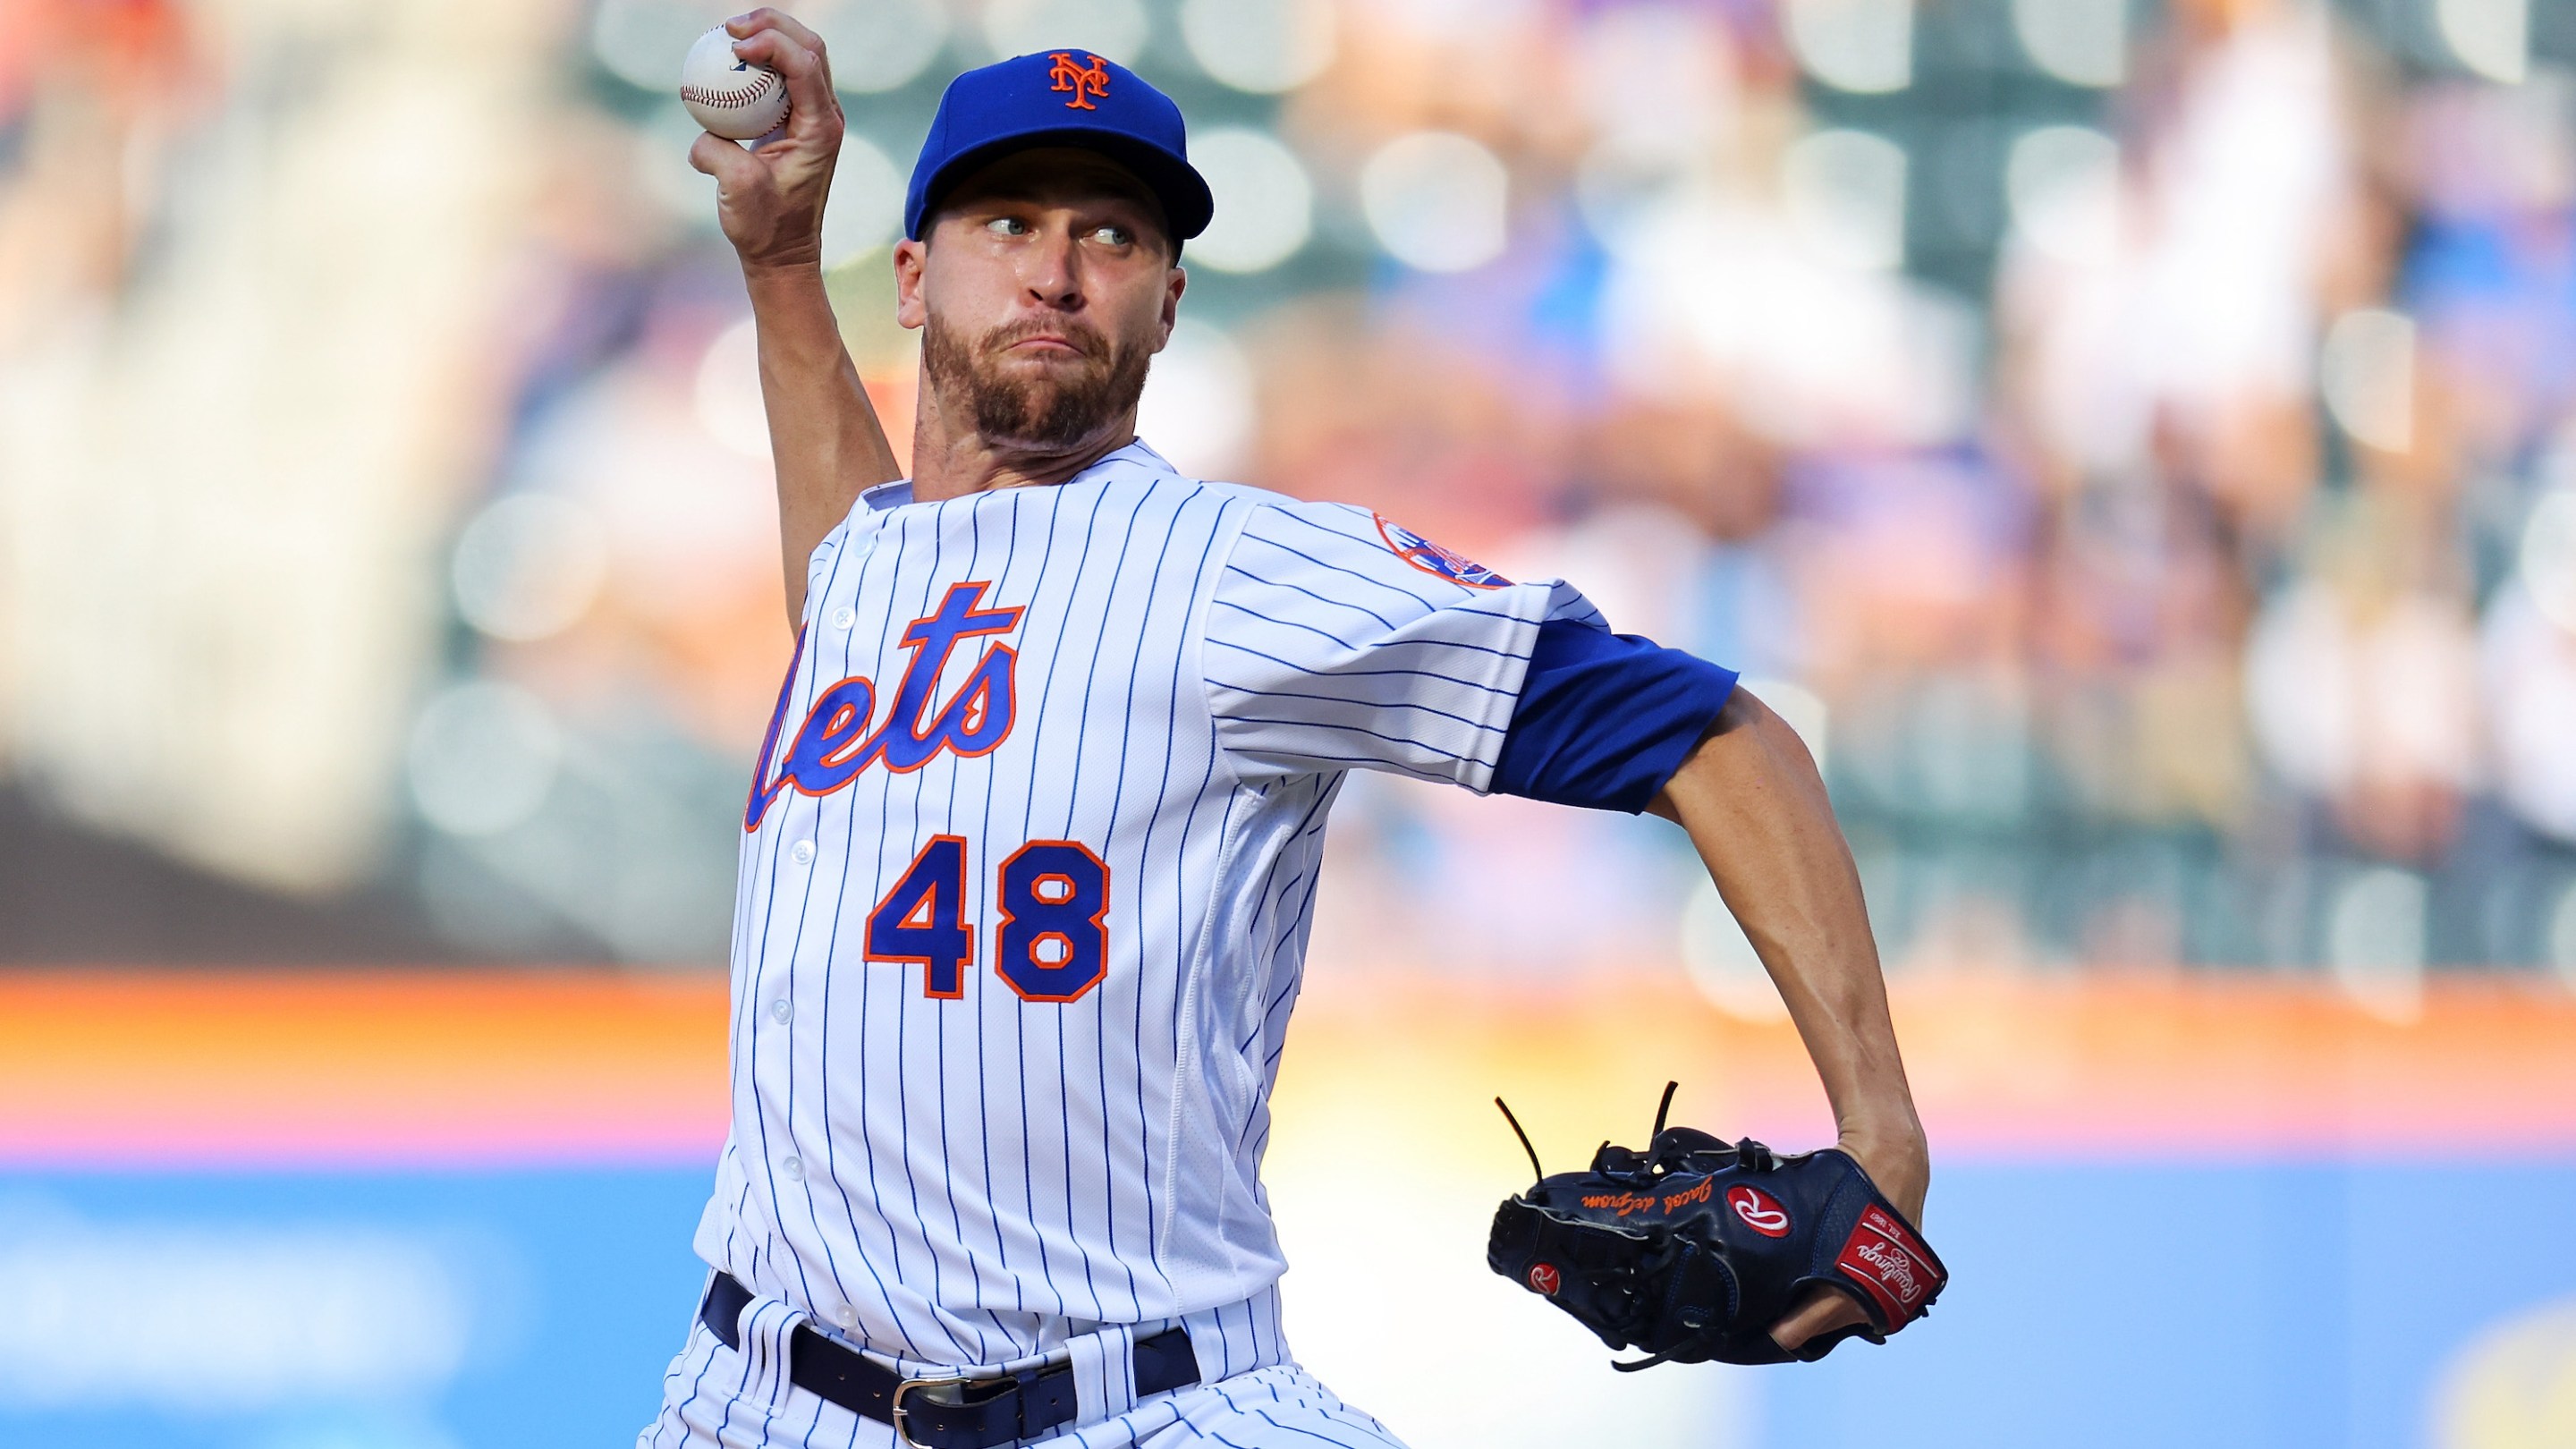 Jacob deGrom pitching against the Atlanta Braves on August 7, 2022, when he was perfect for five-and-two-thirds innings.